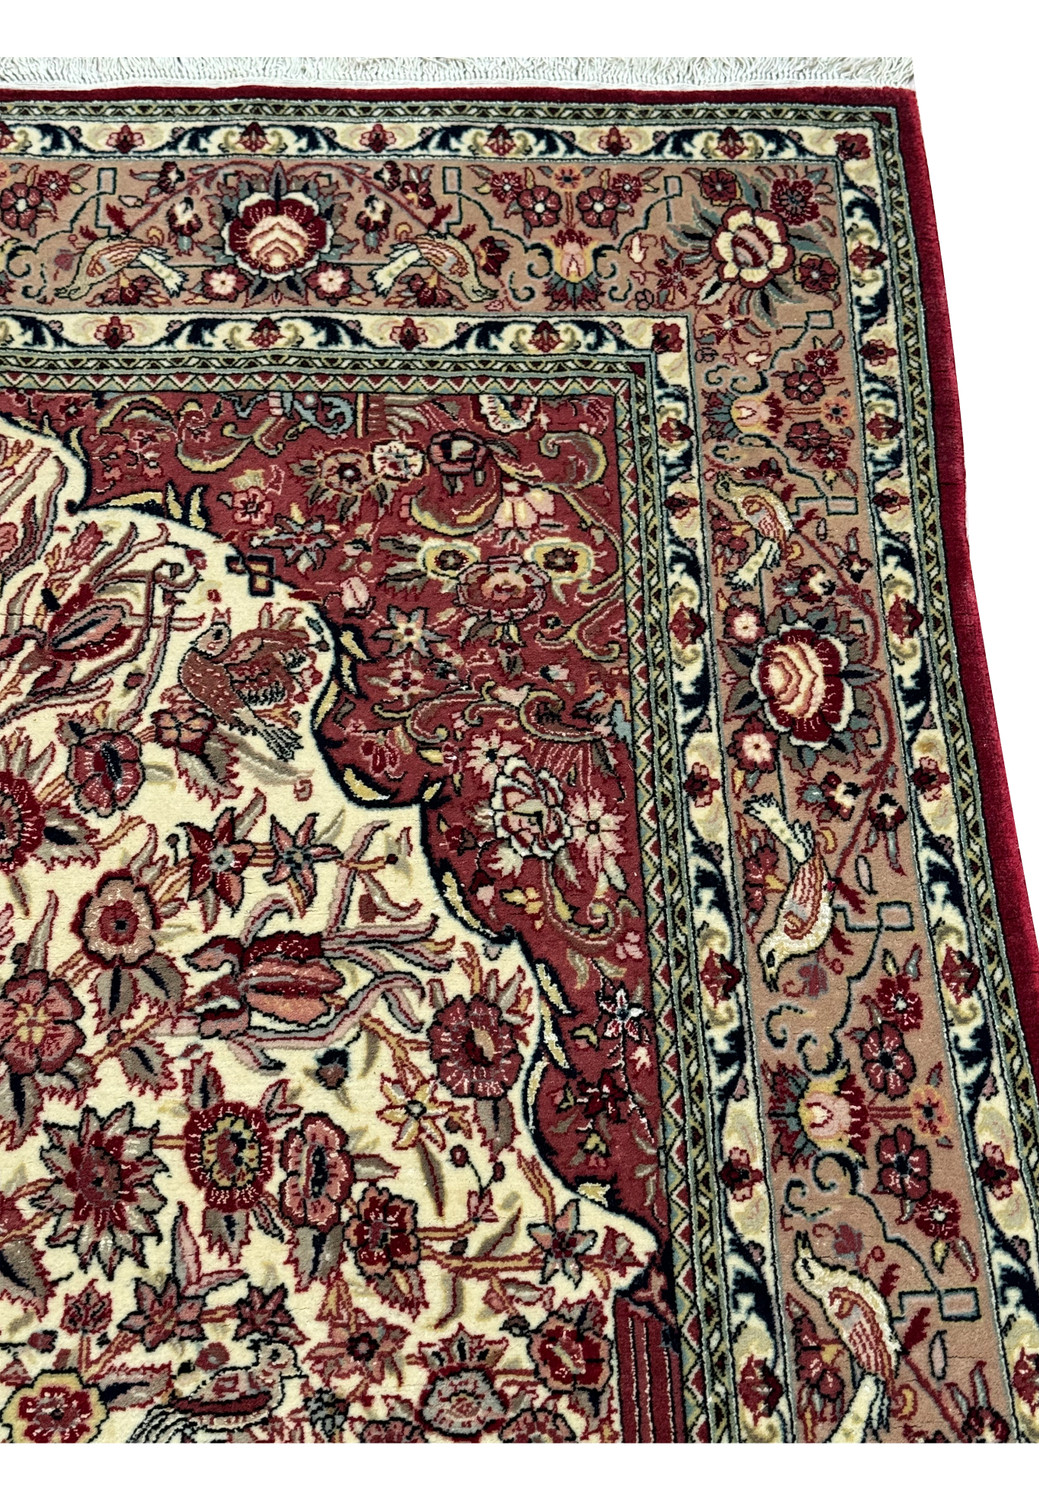 Close-up of the Persian Qum rug's elaborate border with intertwined floral and vine patterns in deep burgundy and navy, set against a cream backdrop.